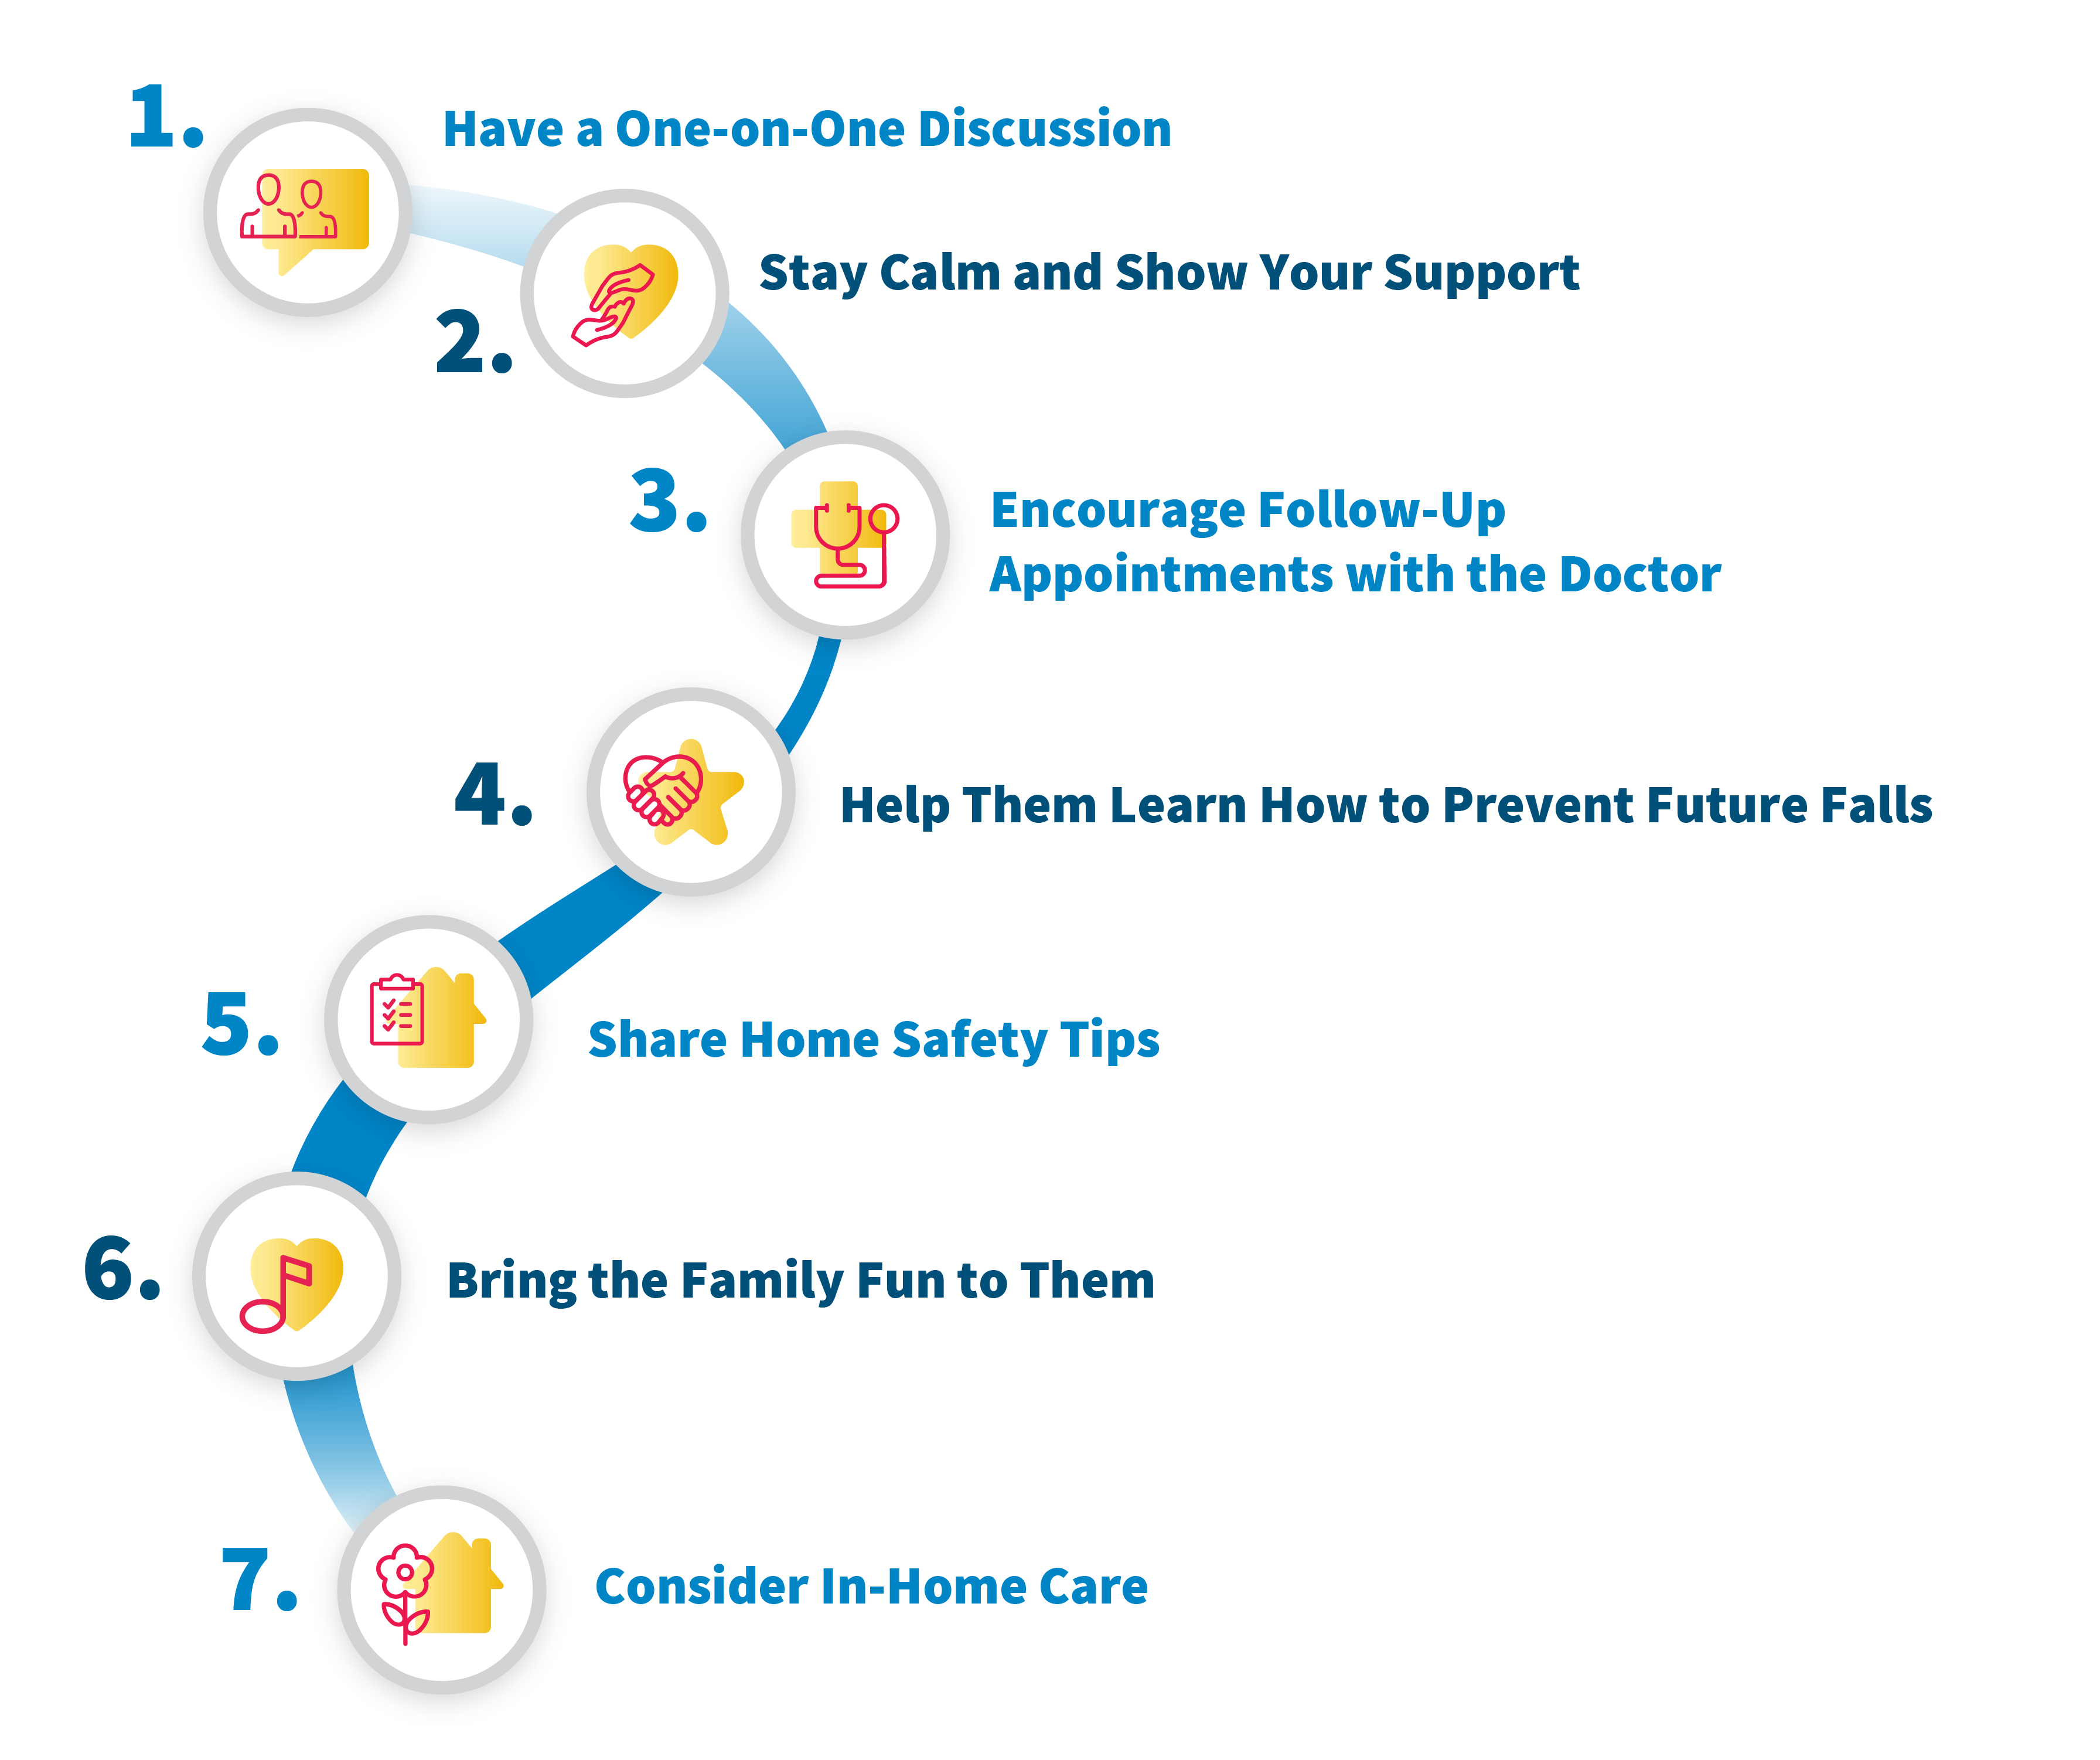 7 Ways You Can Help Your Loved One After a Fall